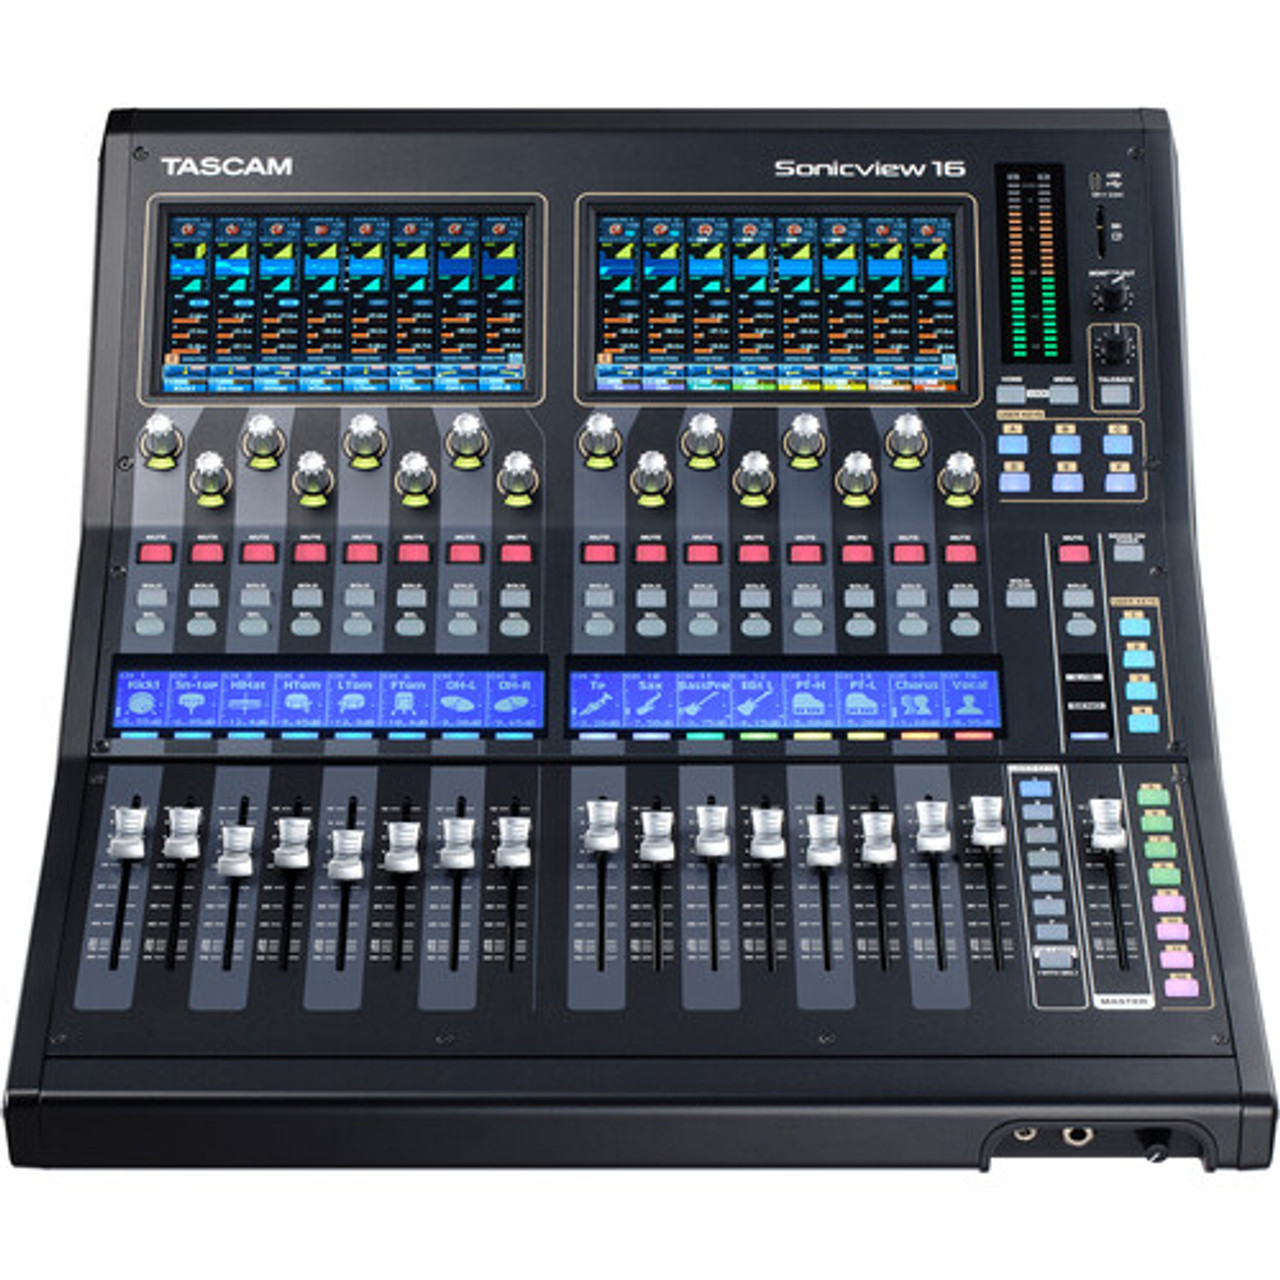 Tascam Sonicview 16XP 16-Channel Digital Mixing Console and Multitrack Recorder (SONICVIEW 16XP)